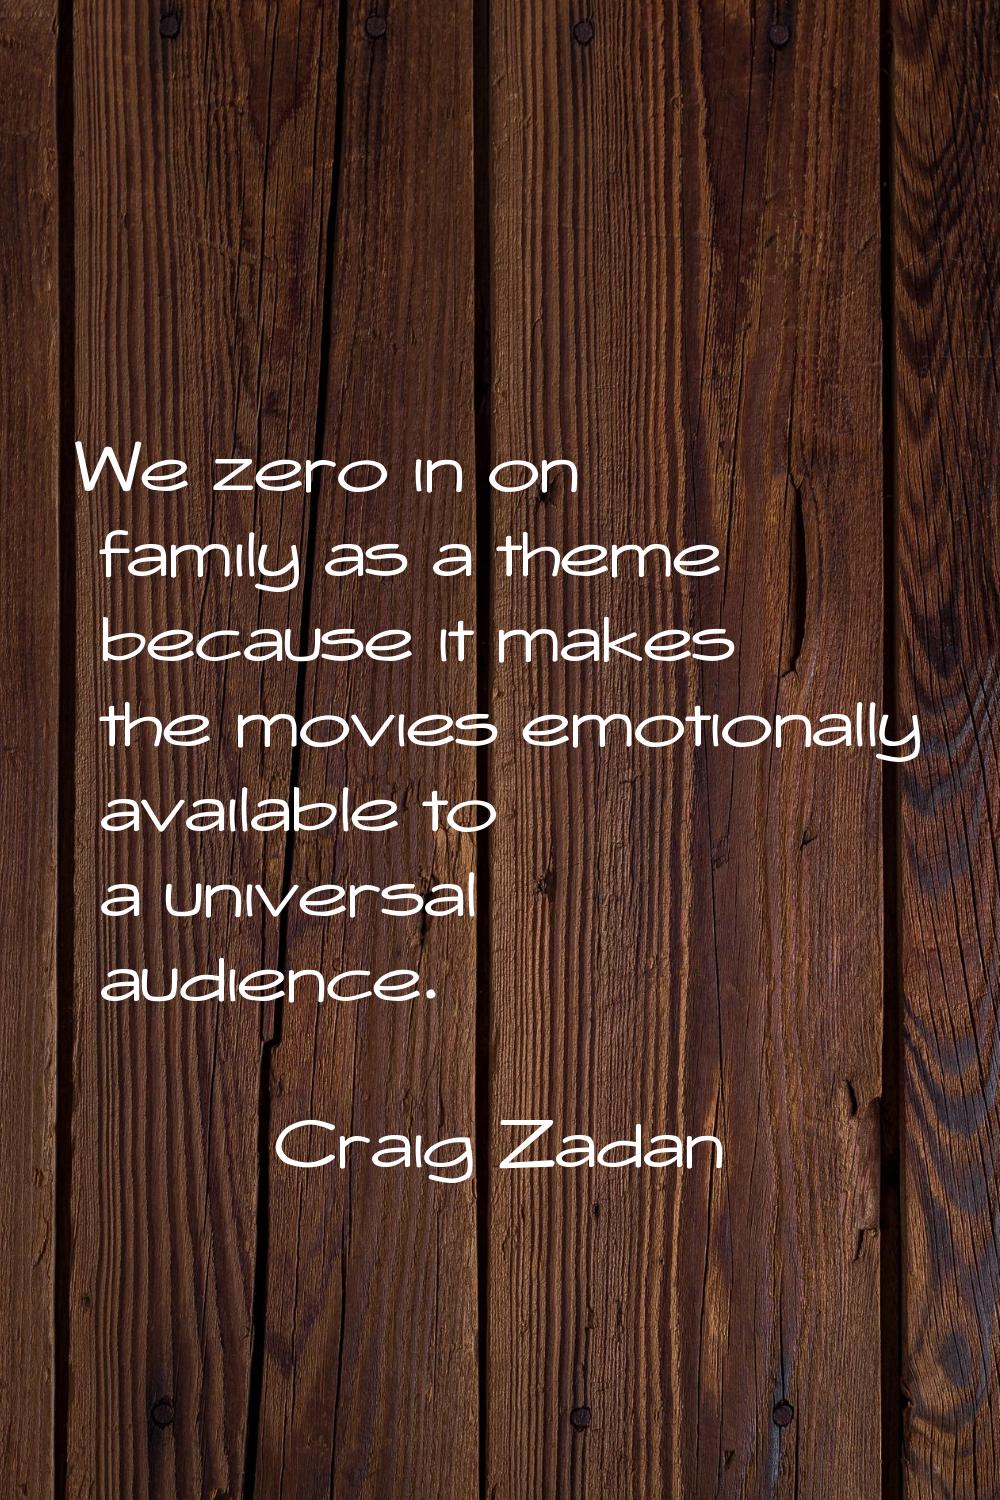 We zero in on family as a theme because it makes the movies emotionally available to a universal au